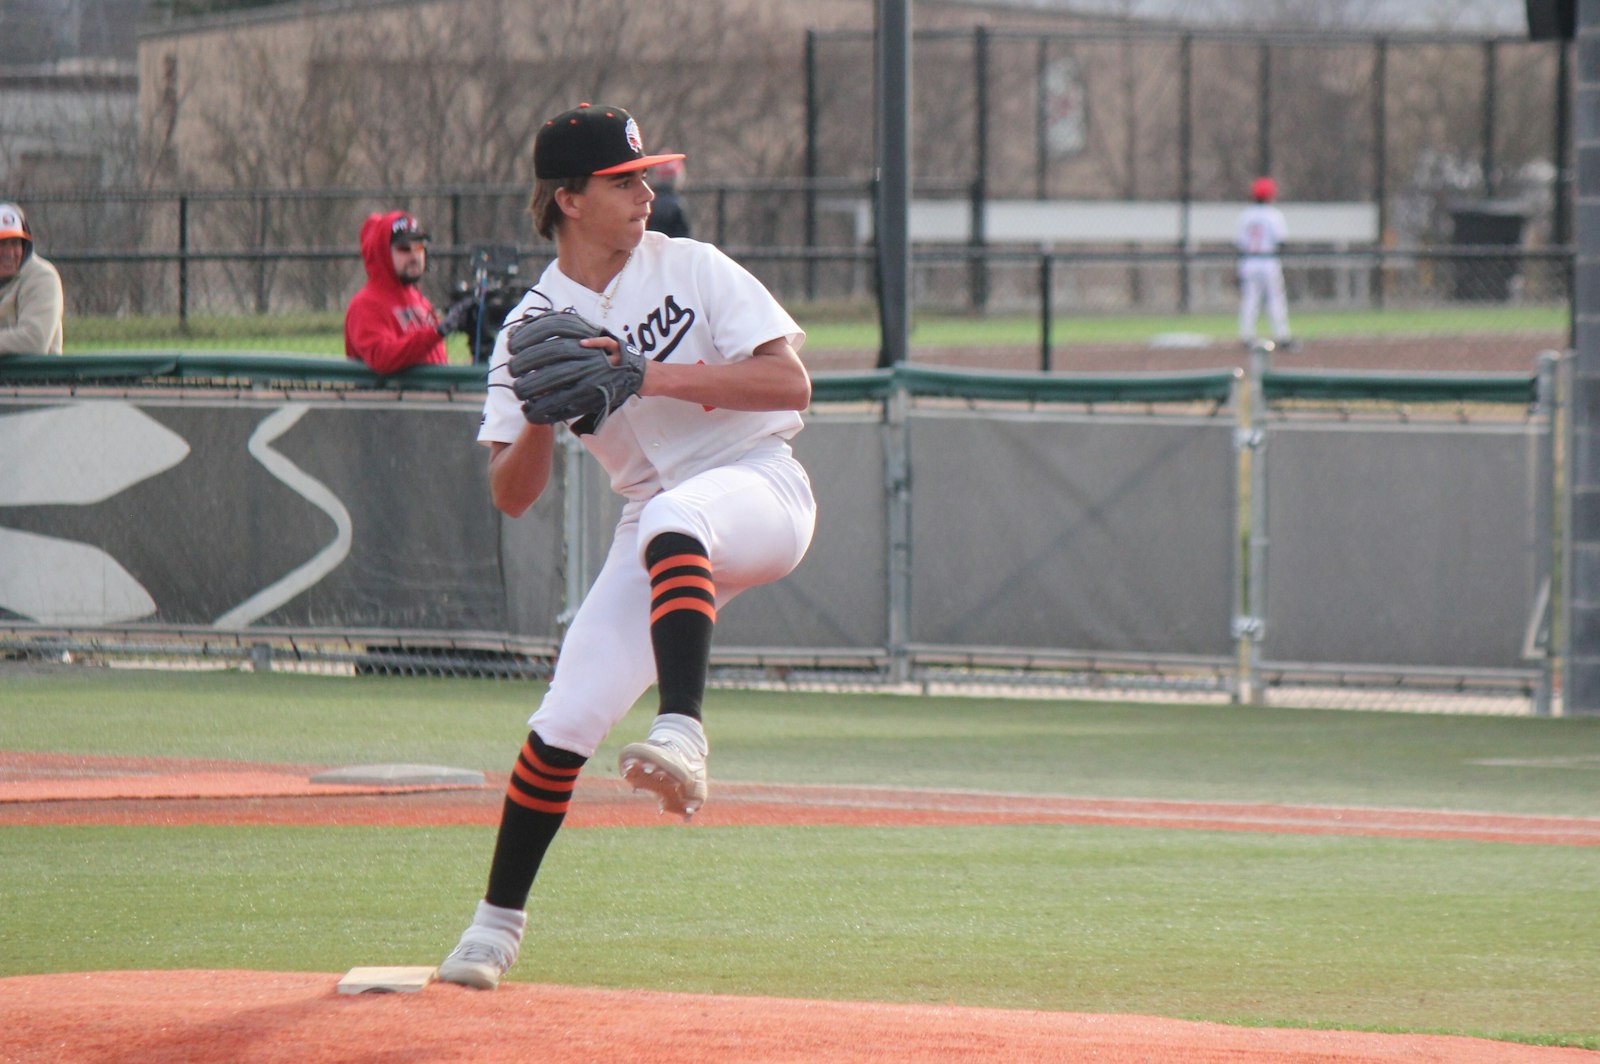 Freshman Aiden Pack got the win in a relief role against Detroit Western April 1. He struck out the side in the sixth inning.